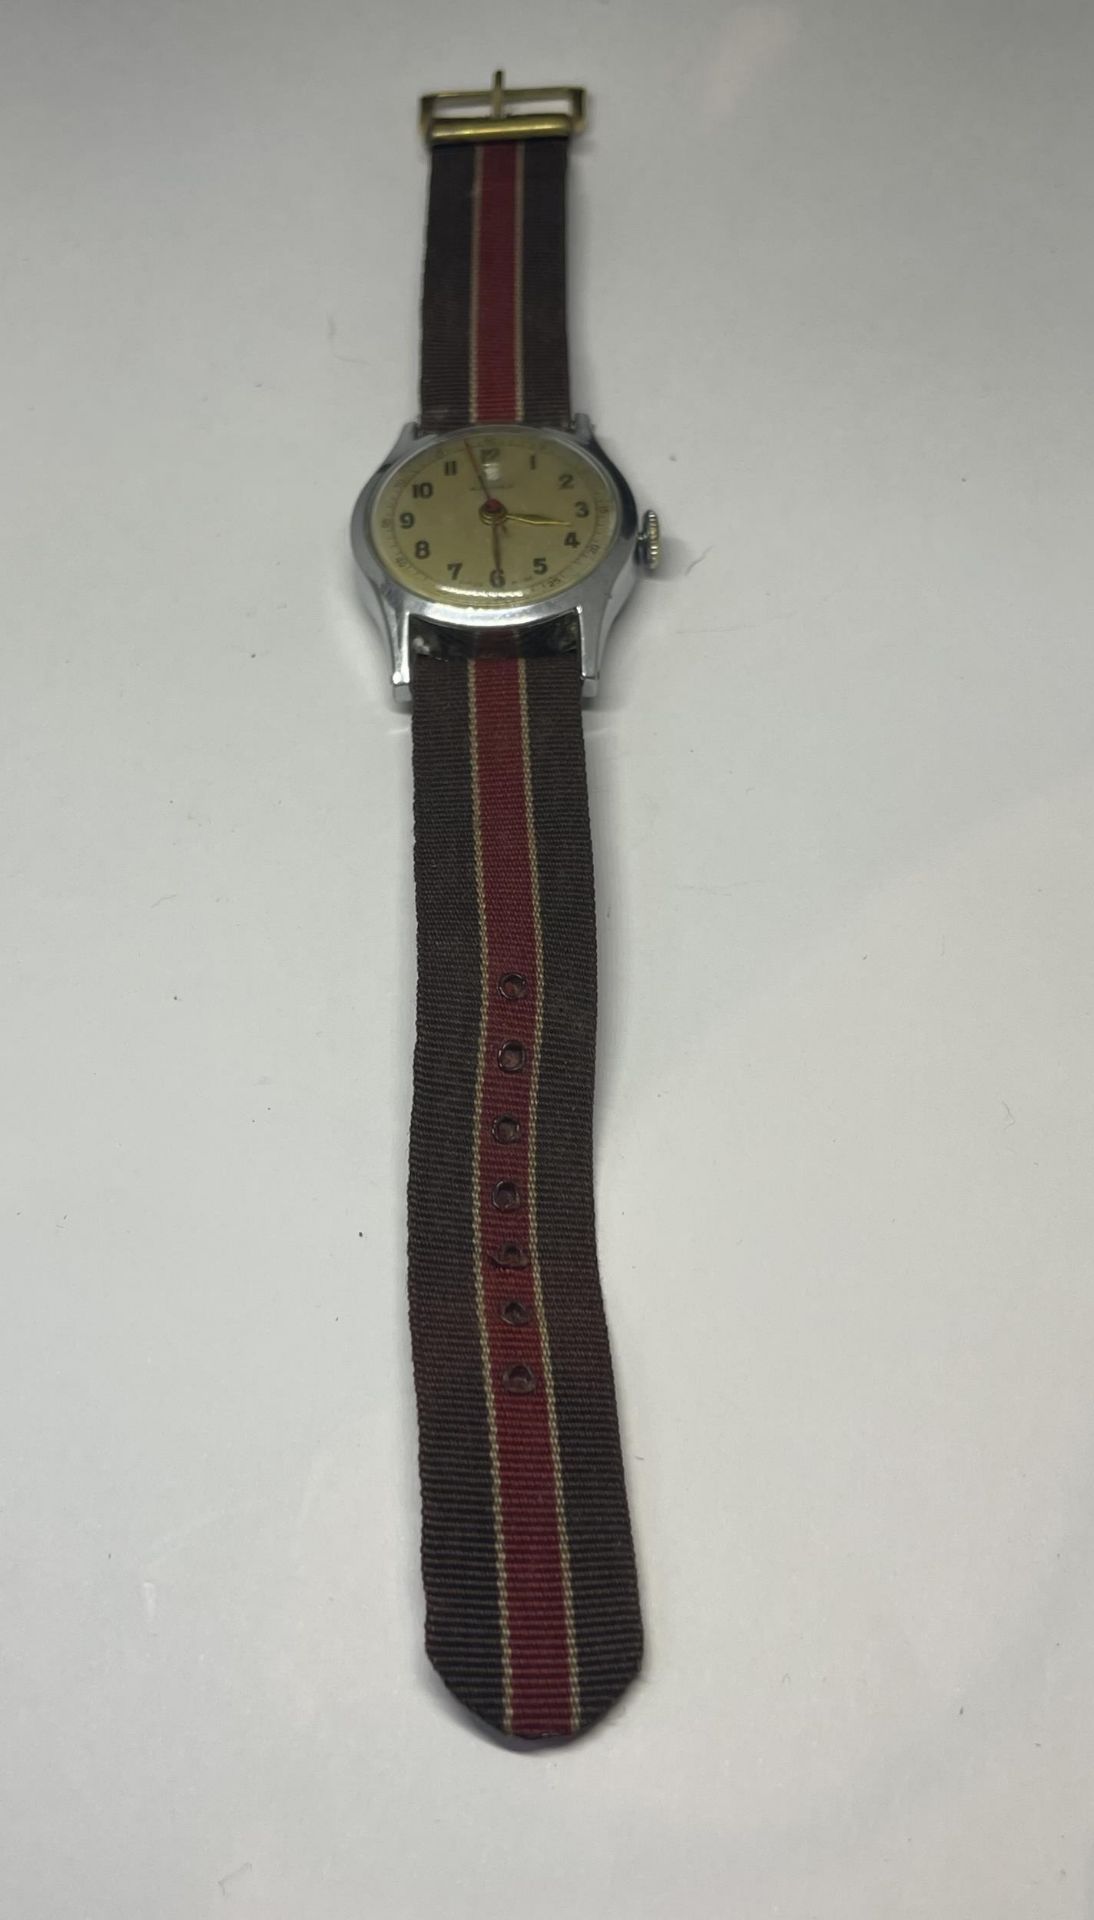 A SOLORA MILITARY STLYE GENTS DATE FUNCTION WRIST WATCH, SEEN WORKING BUT NO WARRANTIES GIVEN - Image 2 of 4